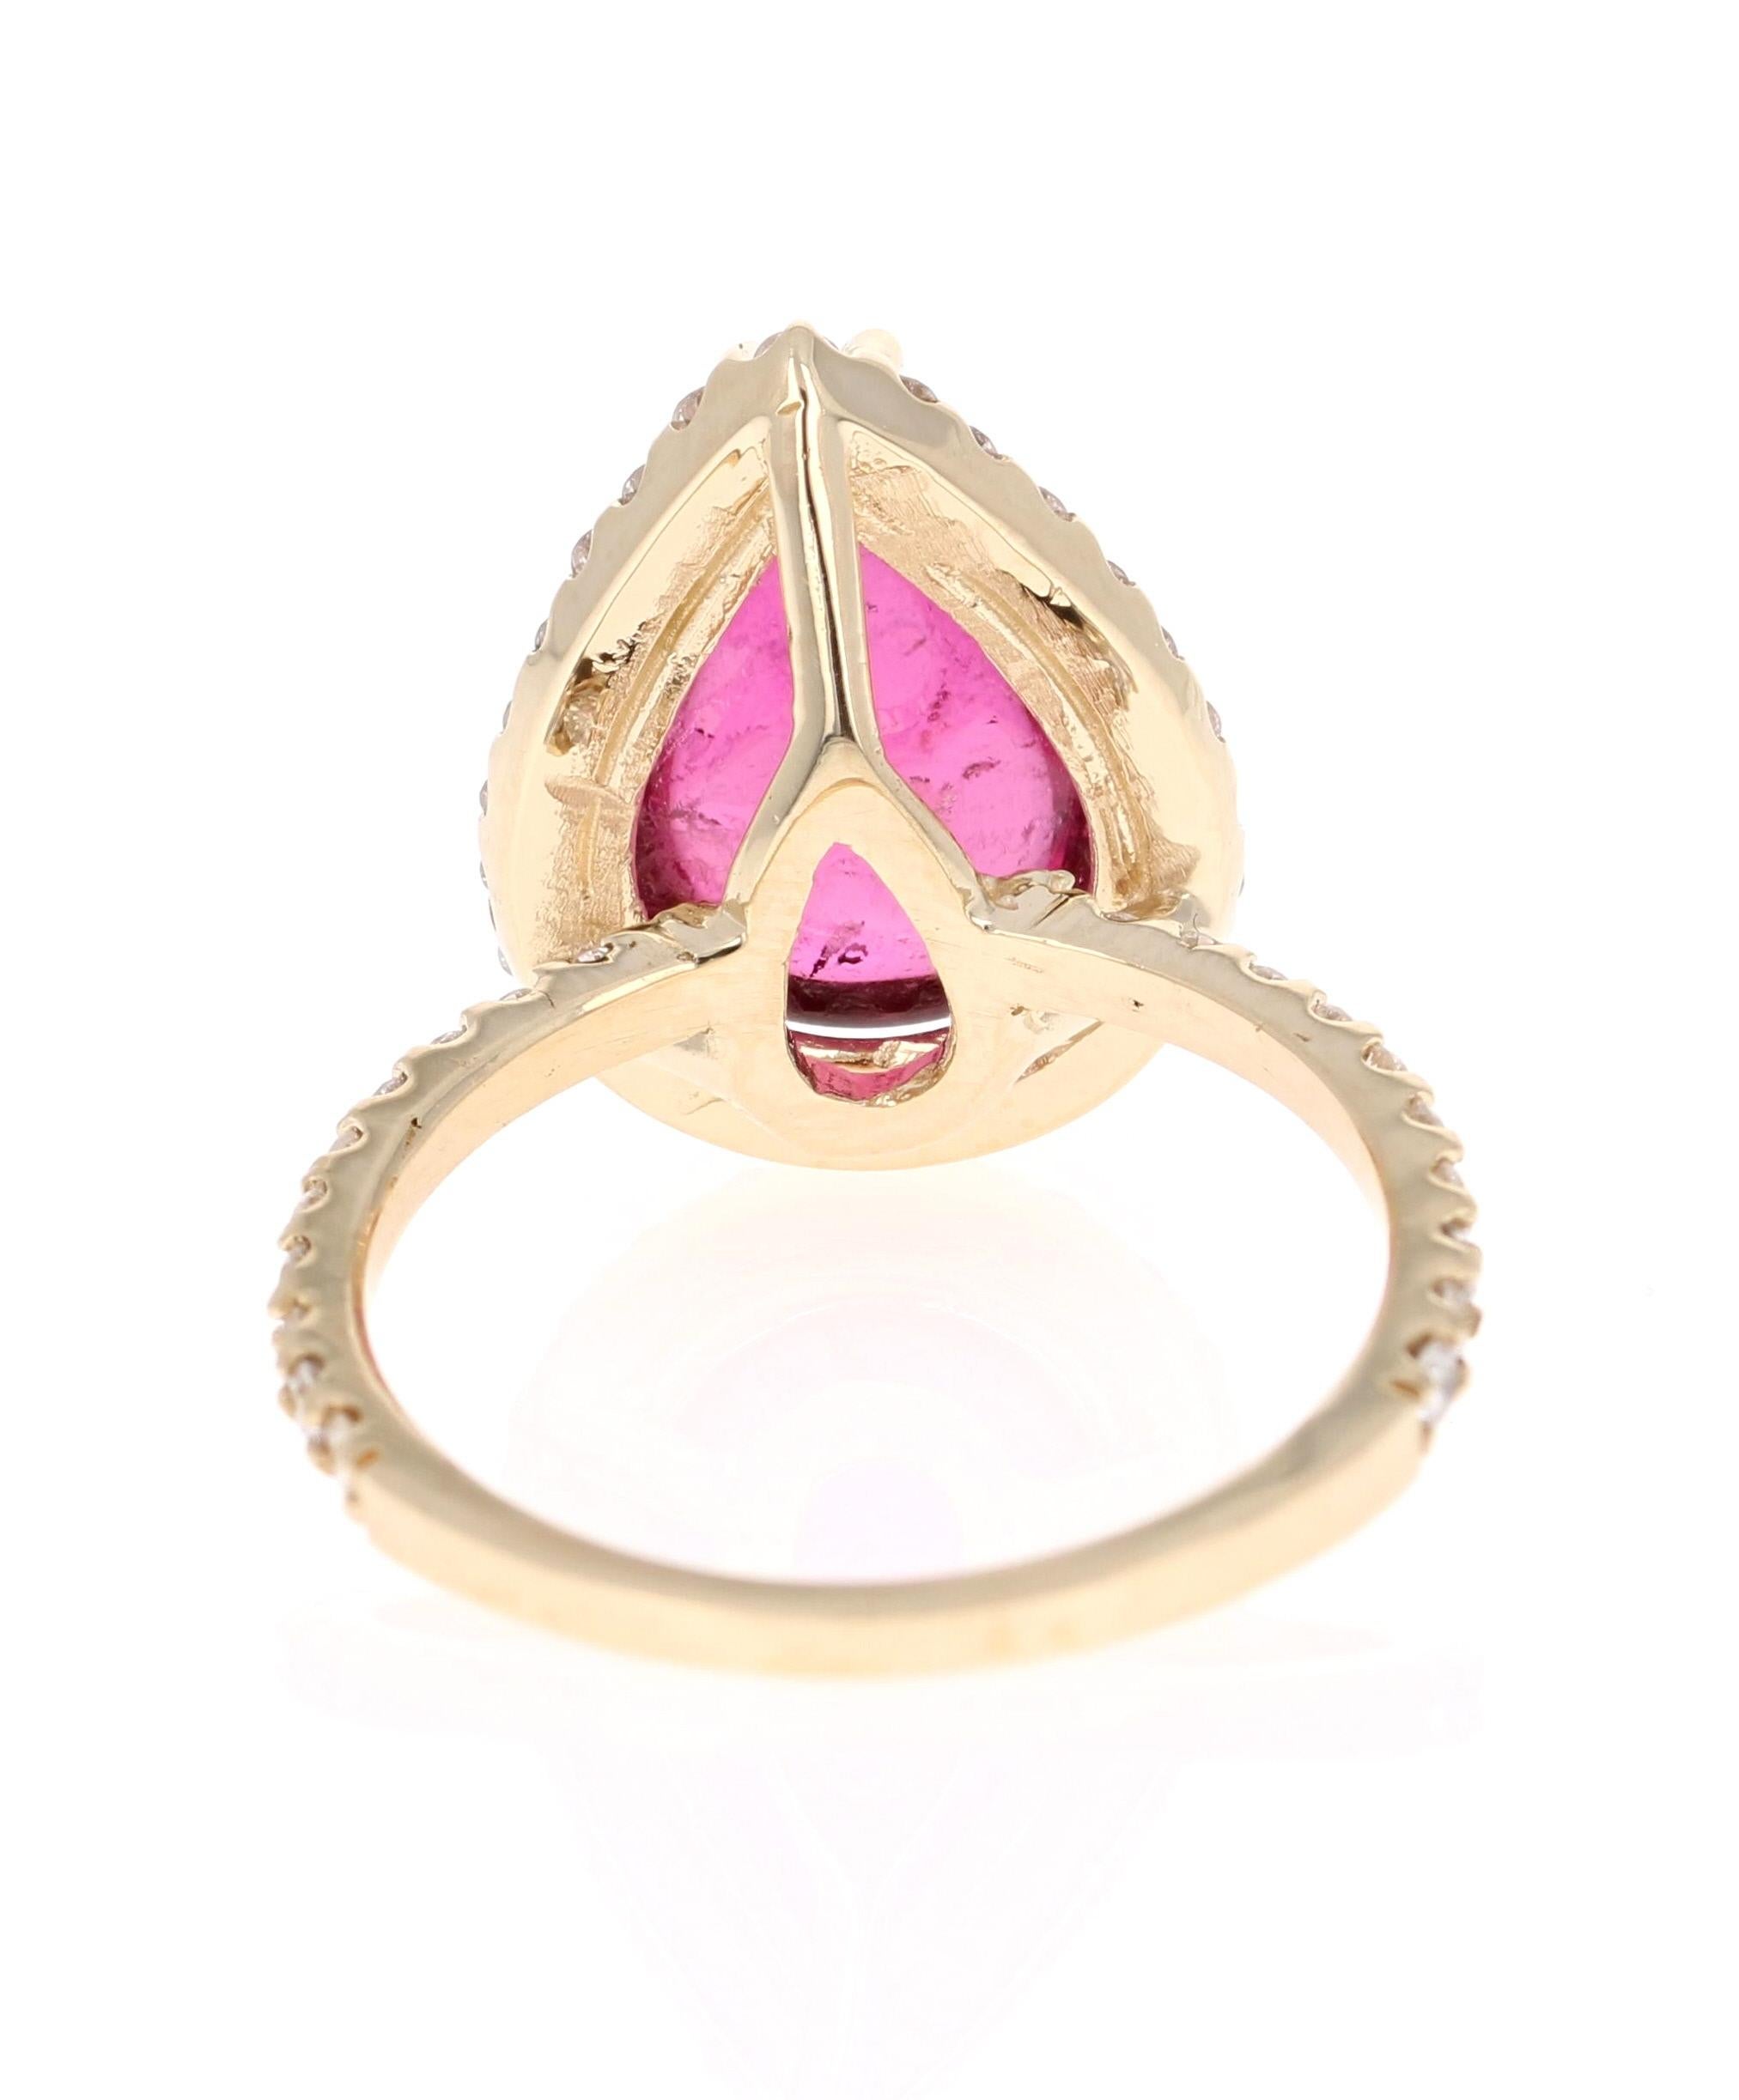 Pear Cut 6.51 Carat Pink Tourmaline Diamond Yellow Gold Cocktail Ring For Sale